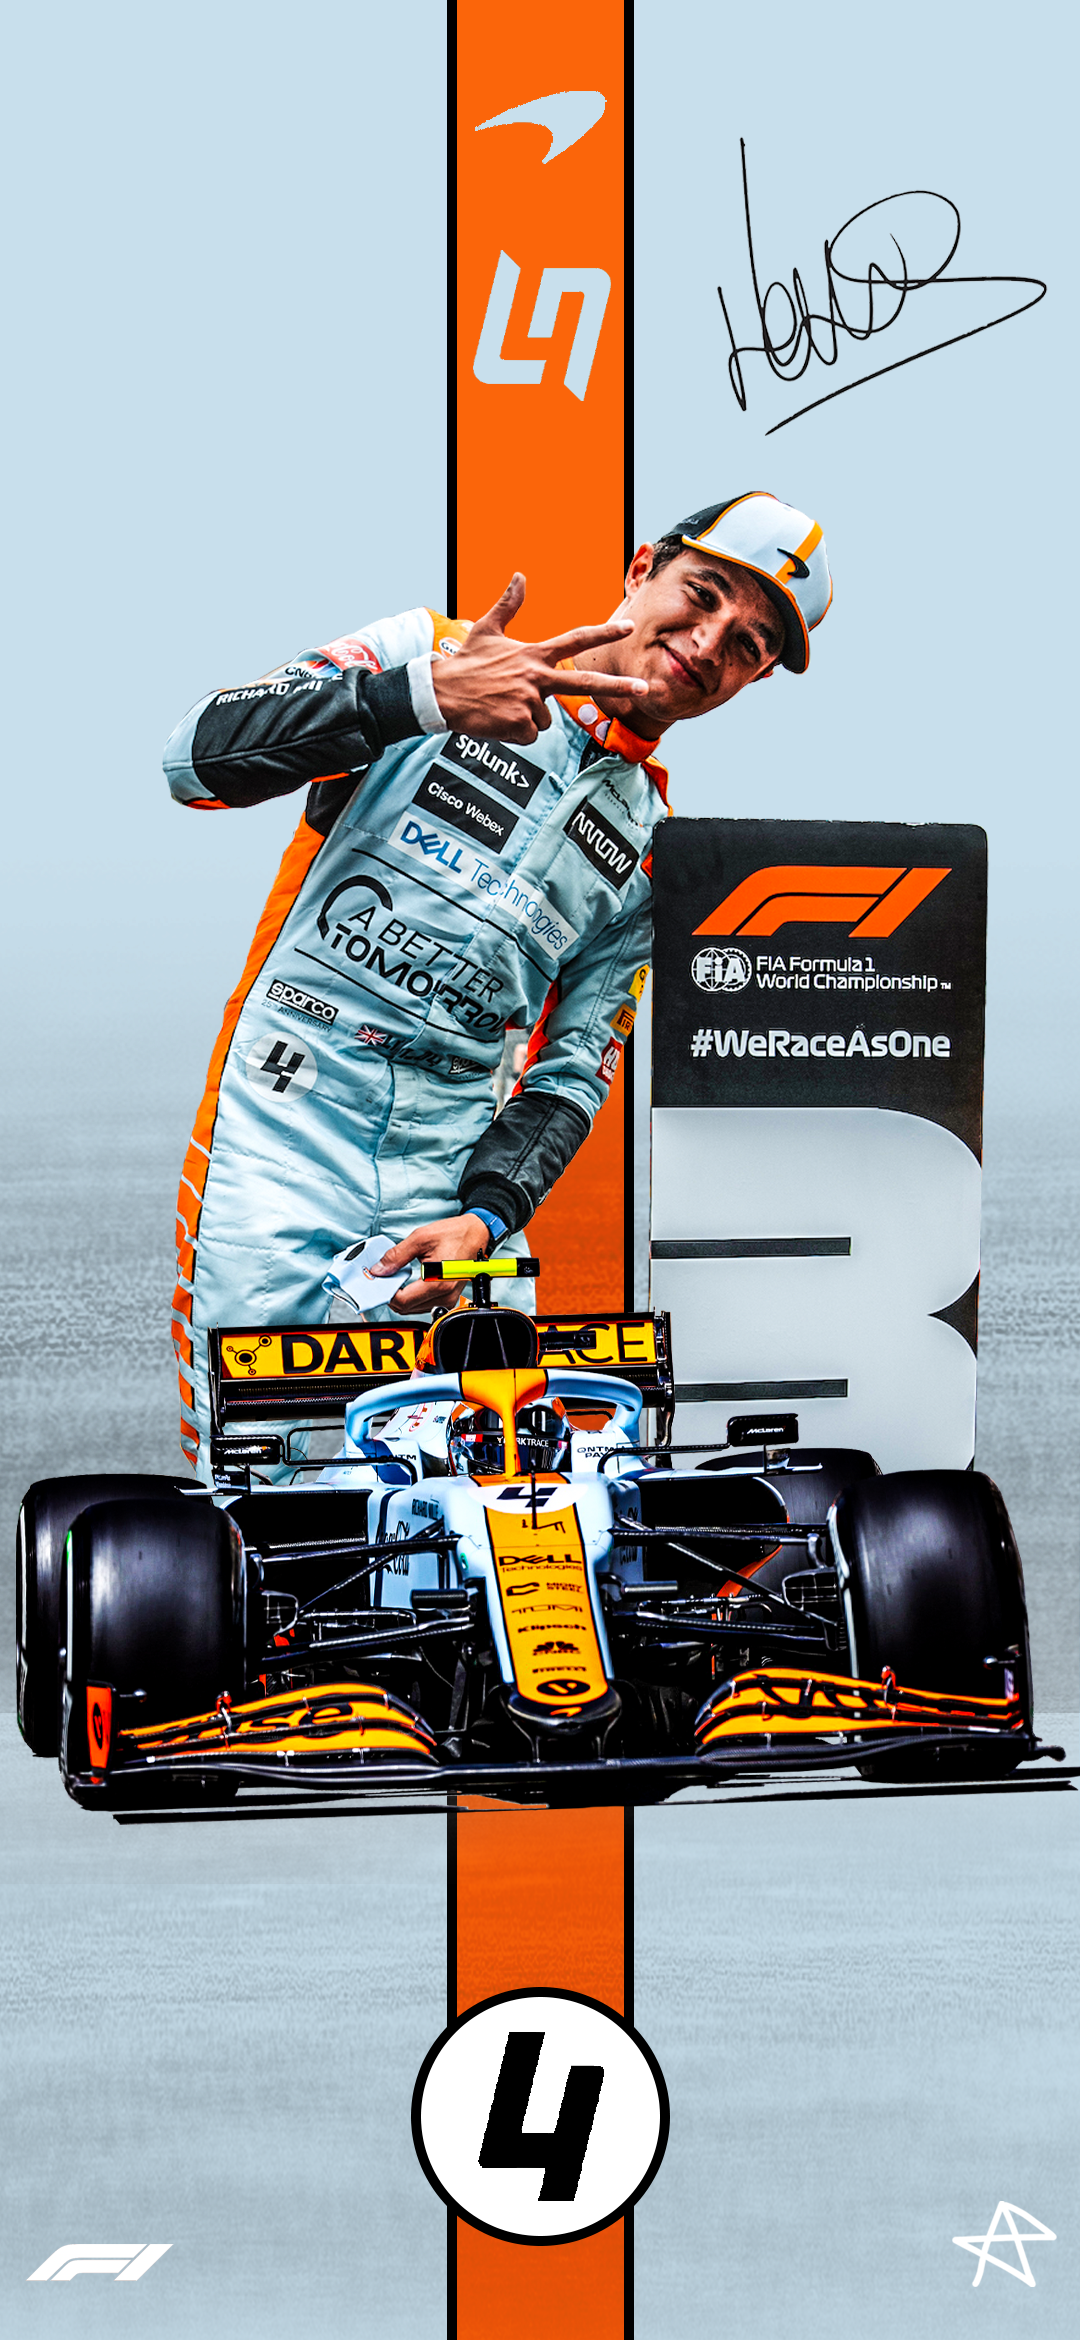 A lot of you asked for it, so here it is the Lando Norris 2021 Monaco gp Wallpaper!: formula1